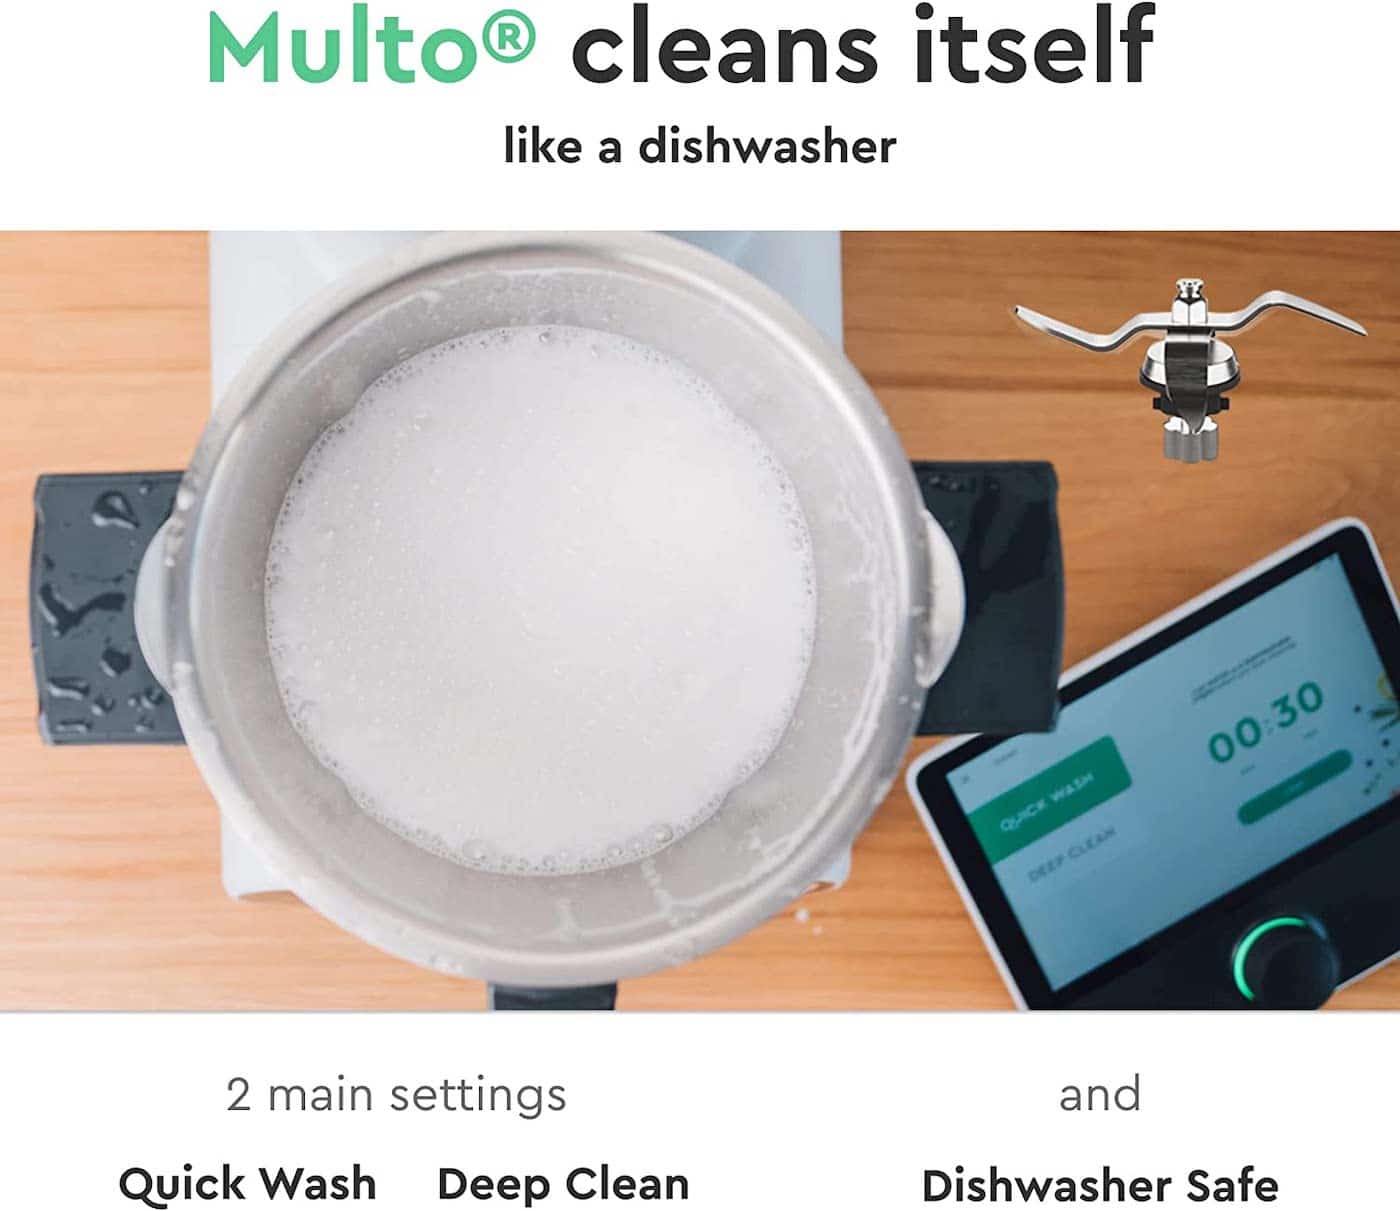 multo cleans itself infographic.